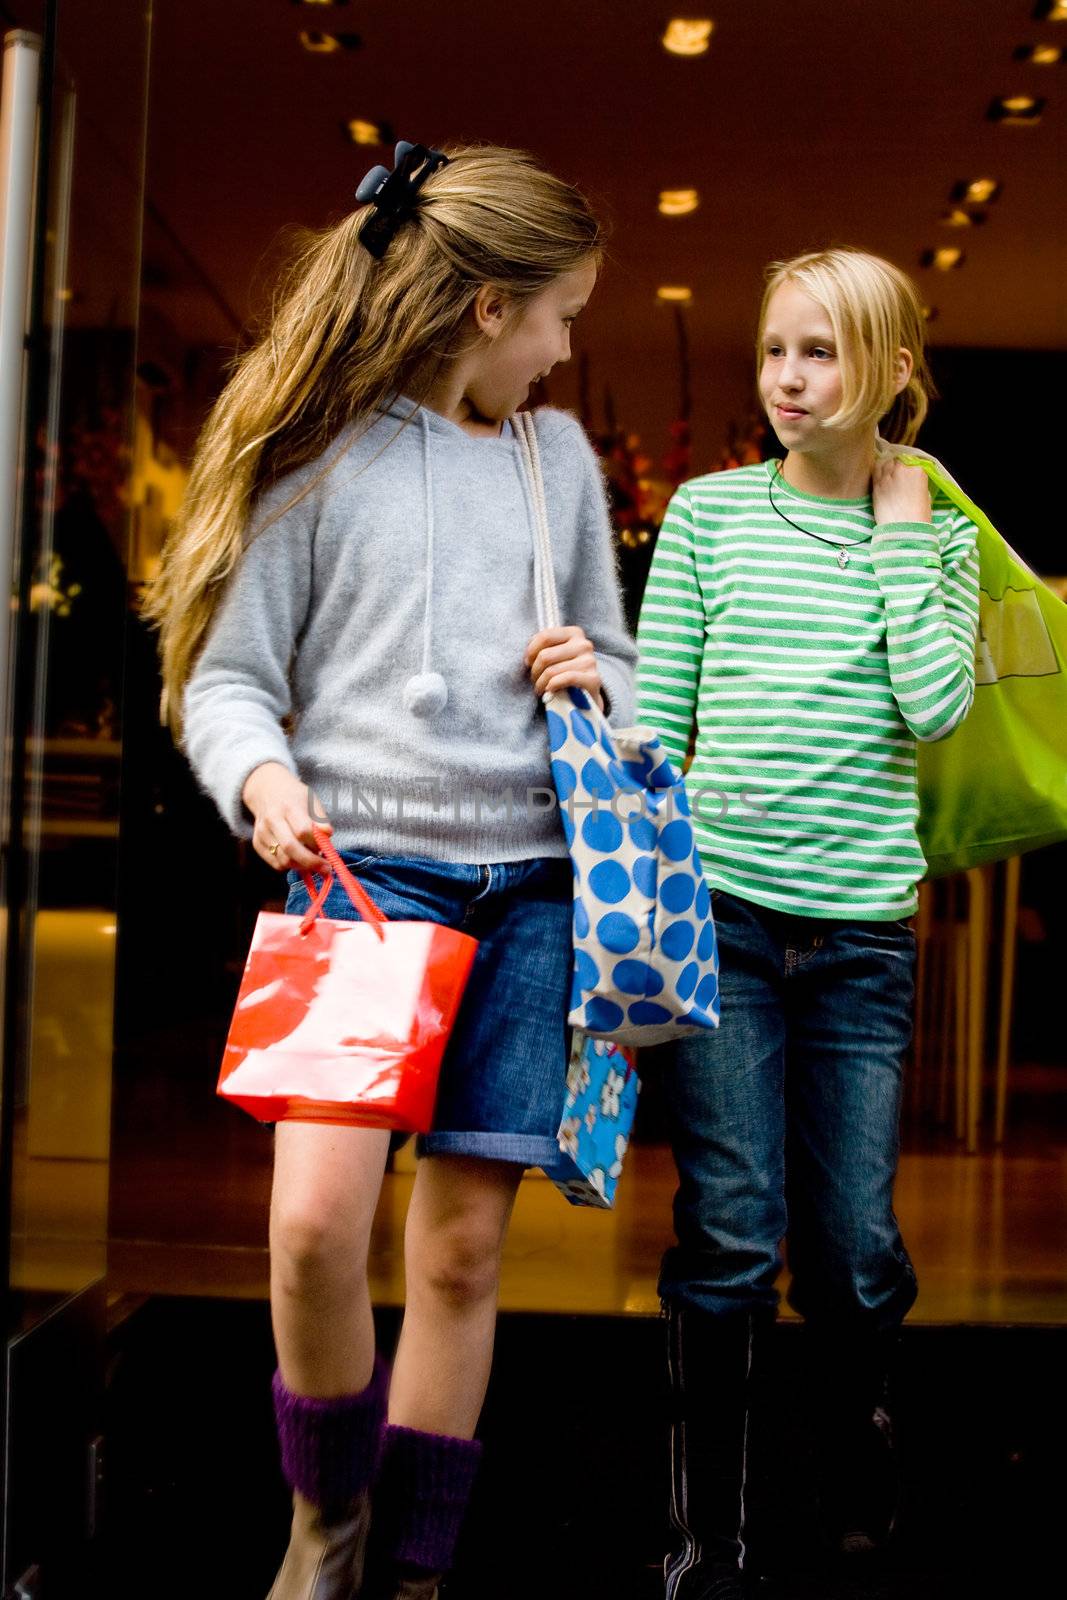 Two yuong children hanging around the streets while shopping